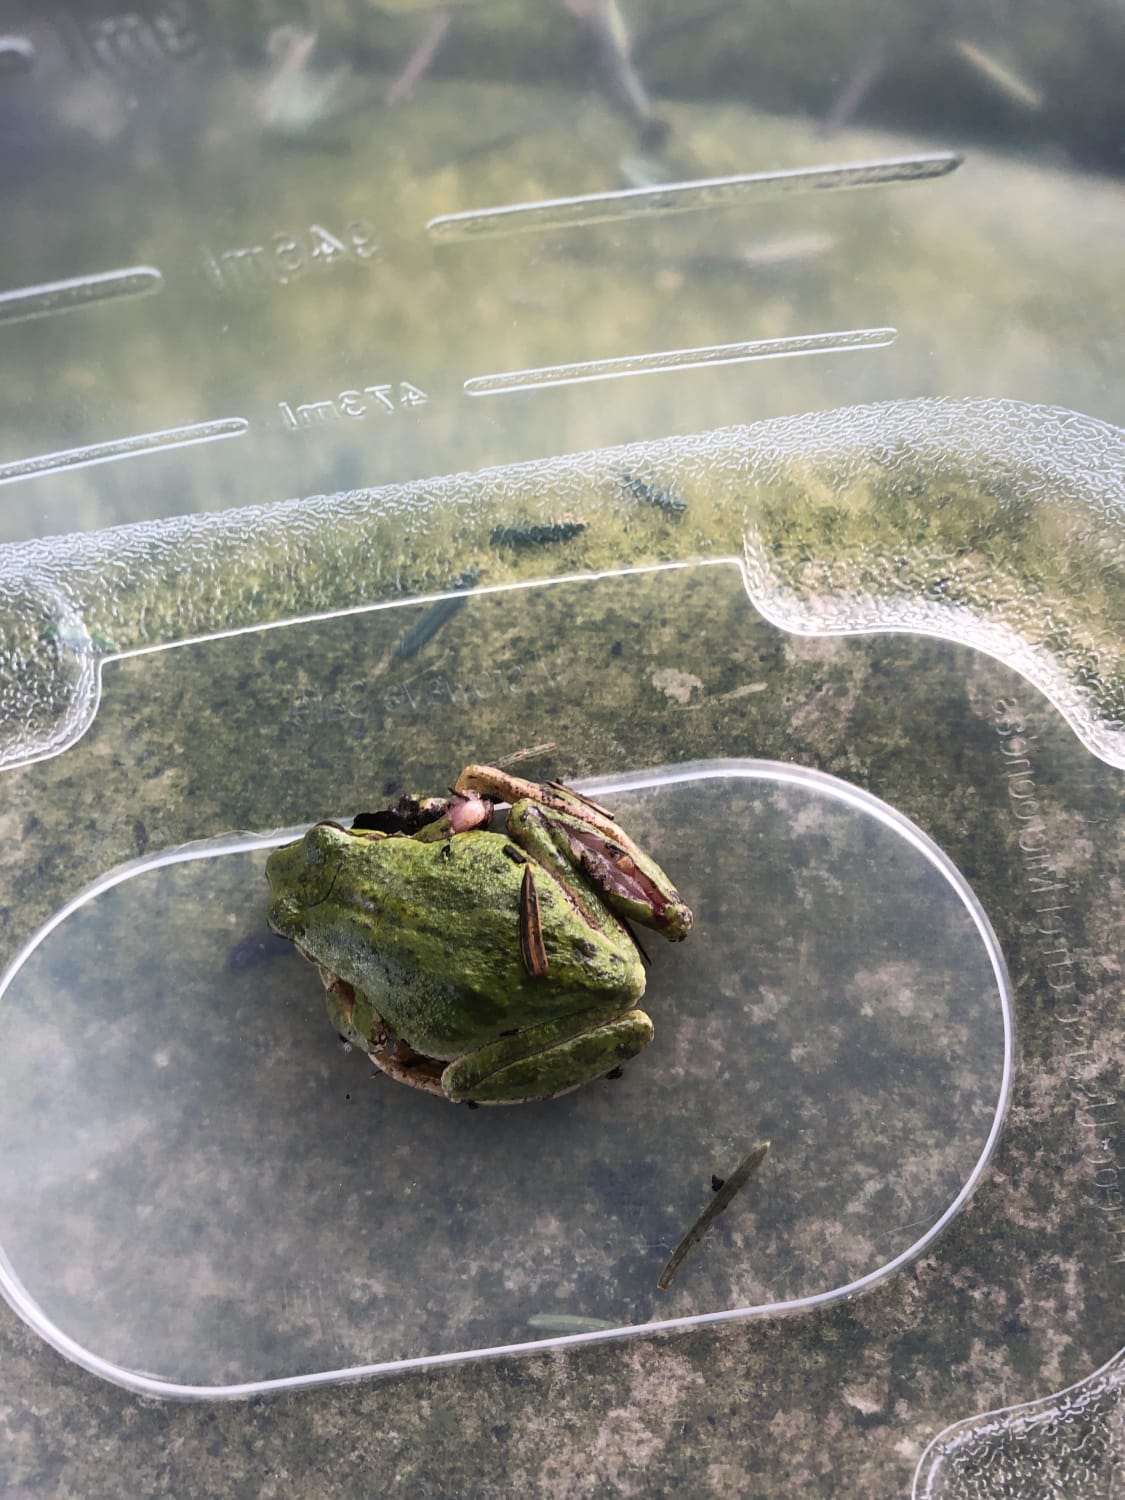 How to take care of a frog I accidentally ran over with a garbage pail? How to nurse it back to health? What do frogs eat? Do I put it out of its misery? Reddit please help